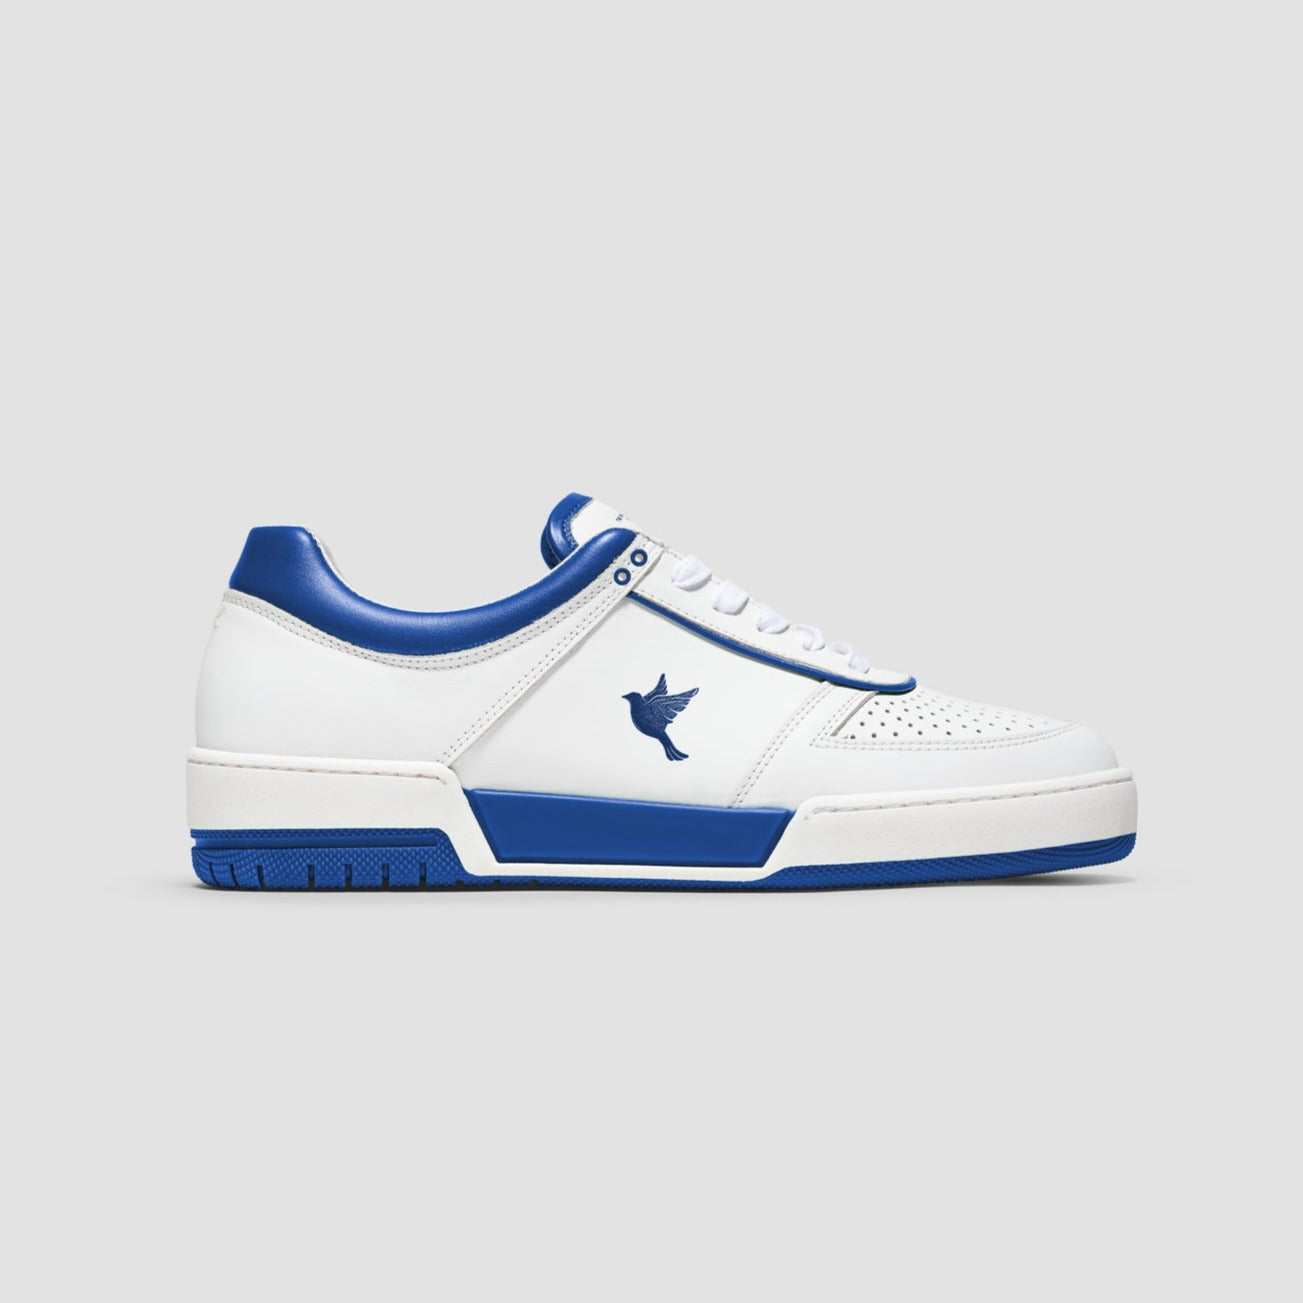 Sustainable sneakers made of durable with blue and white color accents, showcasing a 3D-printed dove emblem on the side.